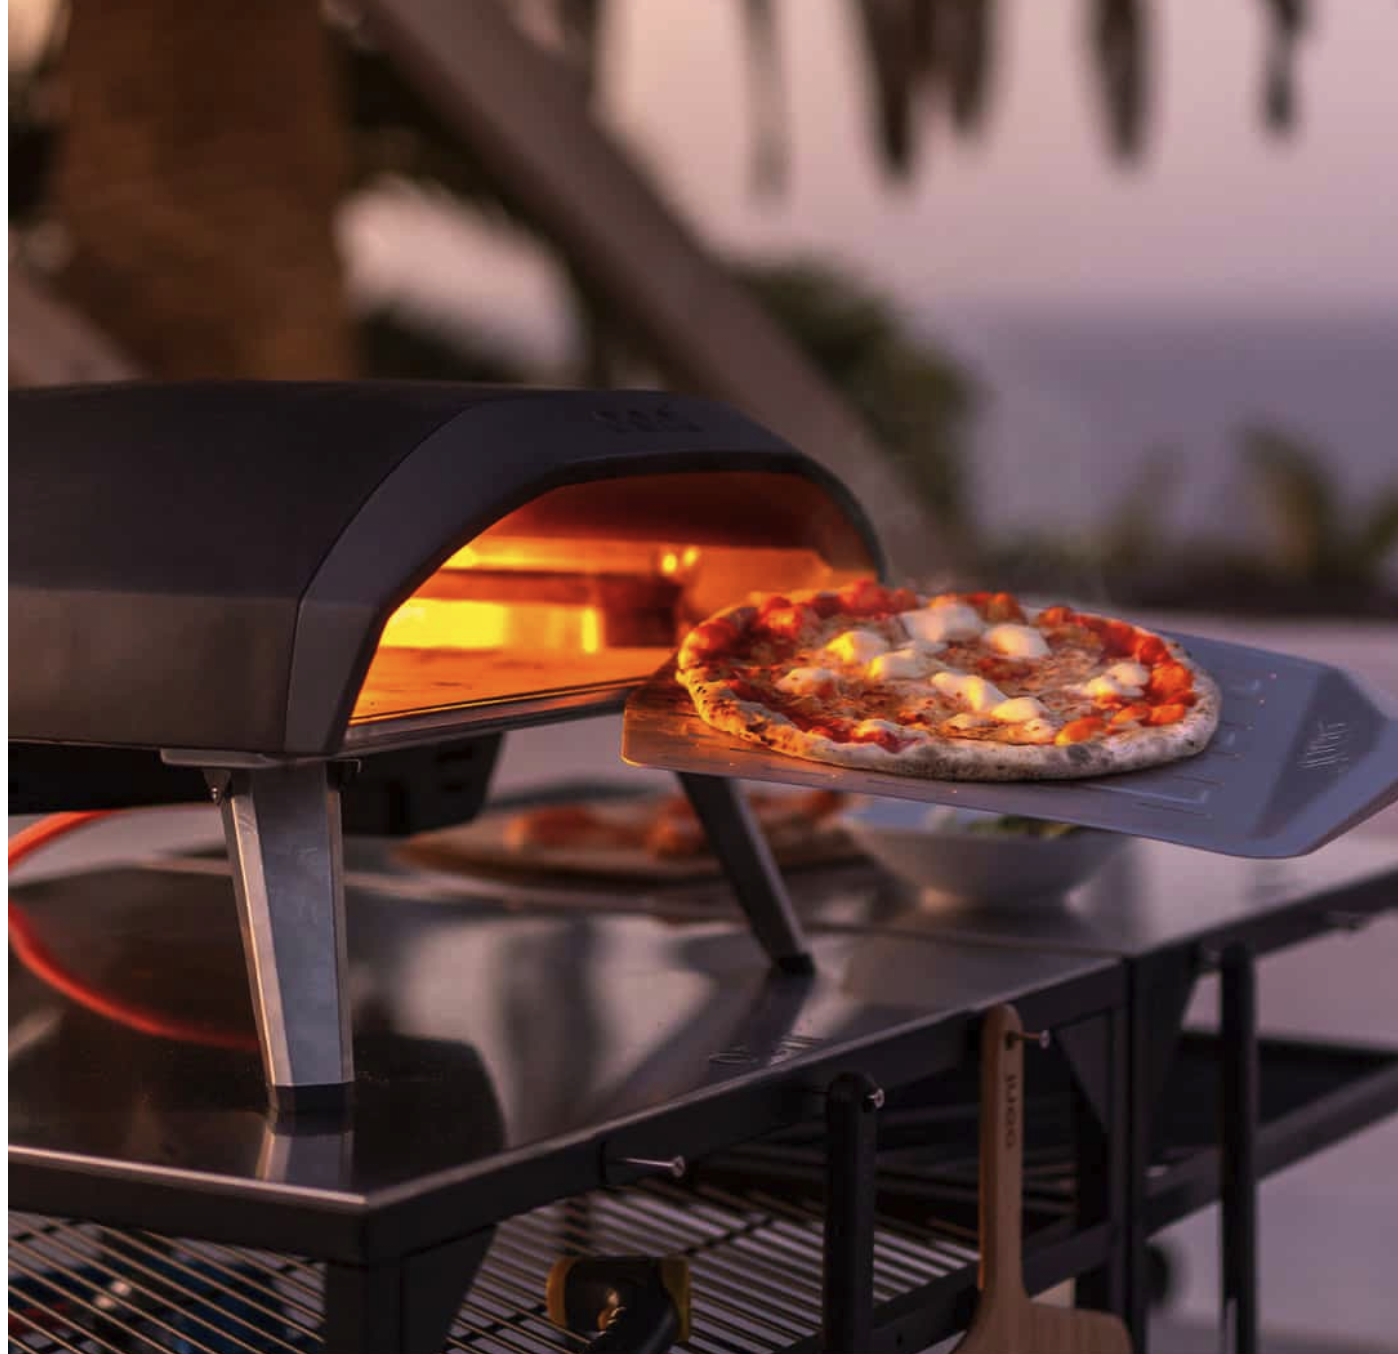 Our 16” Ooni pizza oven cooks delicious pizza in 2 minutes. Check out my unbiased review and shop with my link for free shipping and a money-back guarantee. www.grownupdish.com